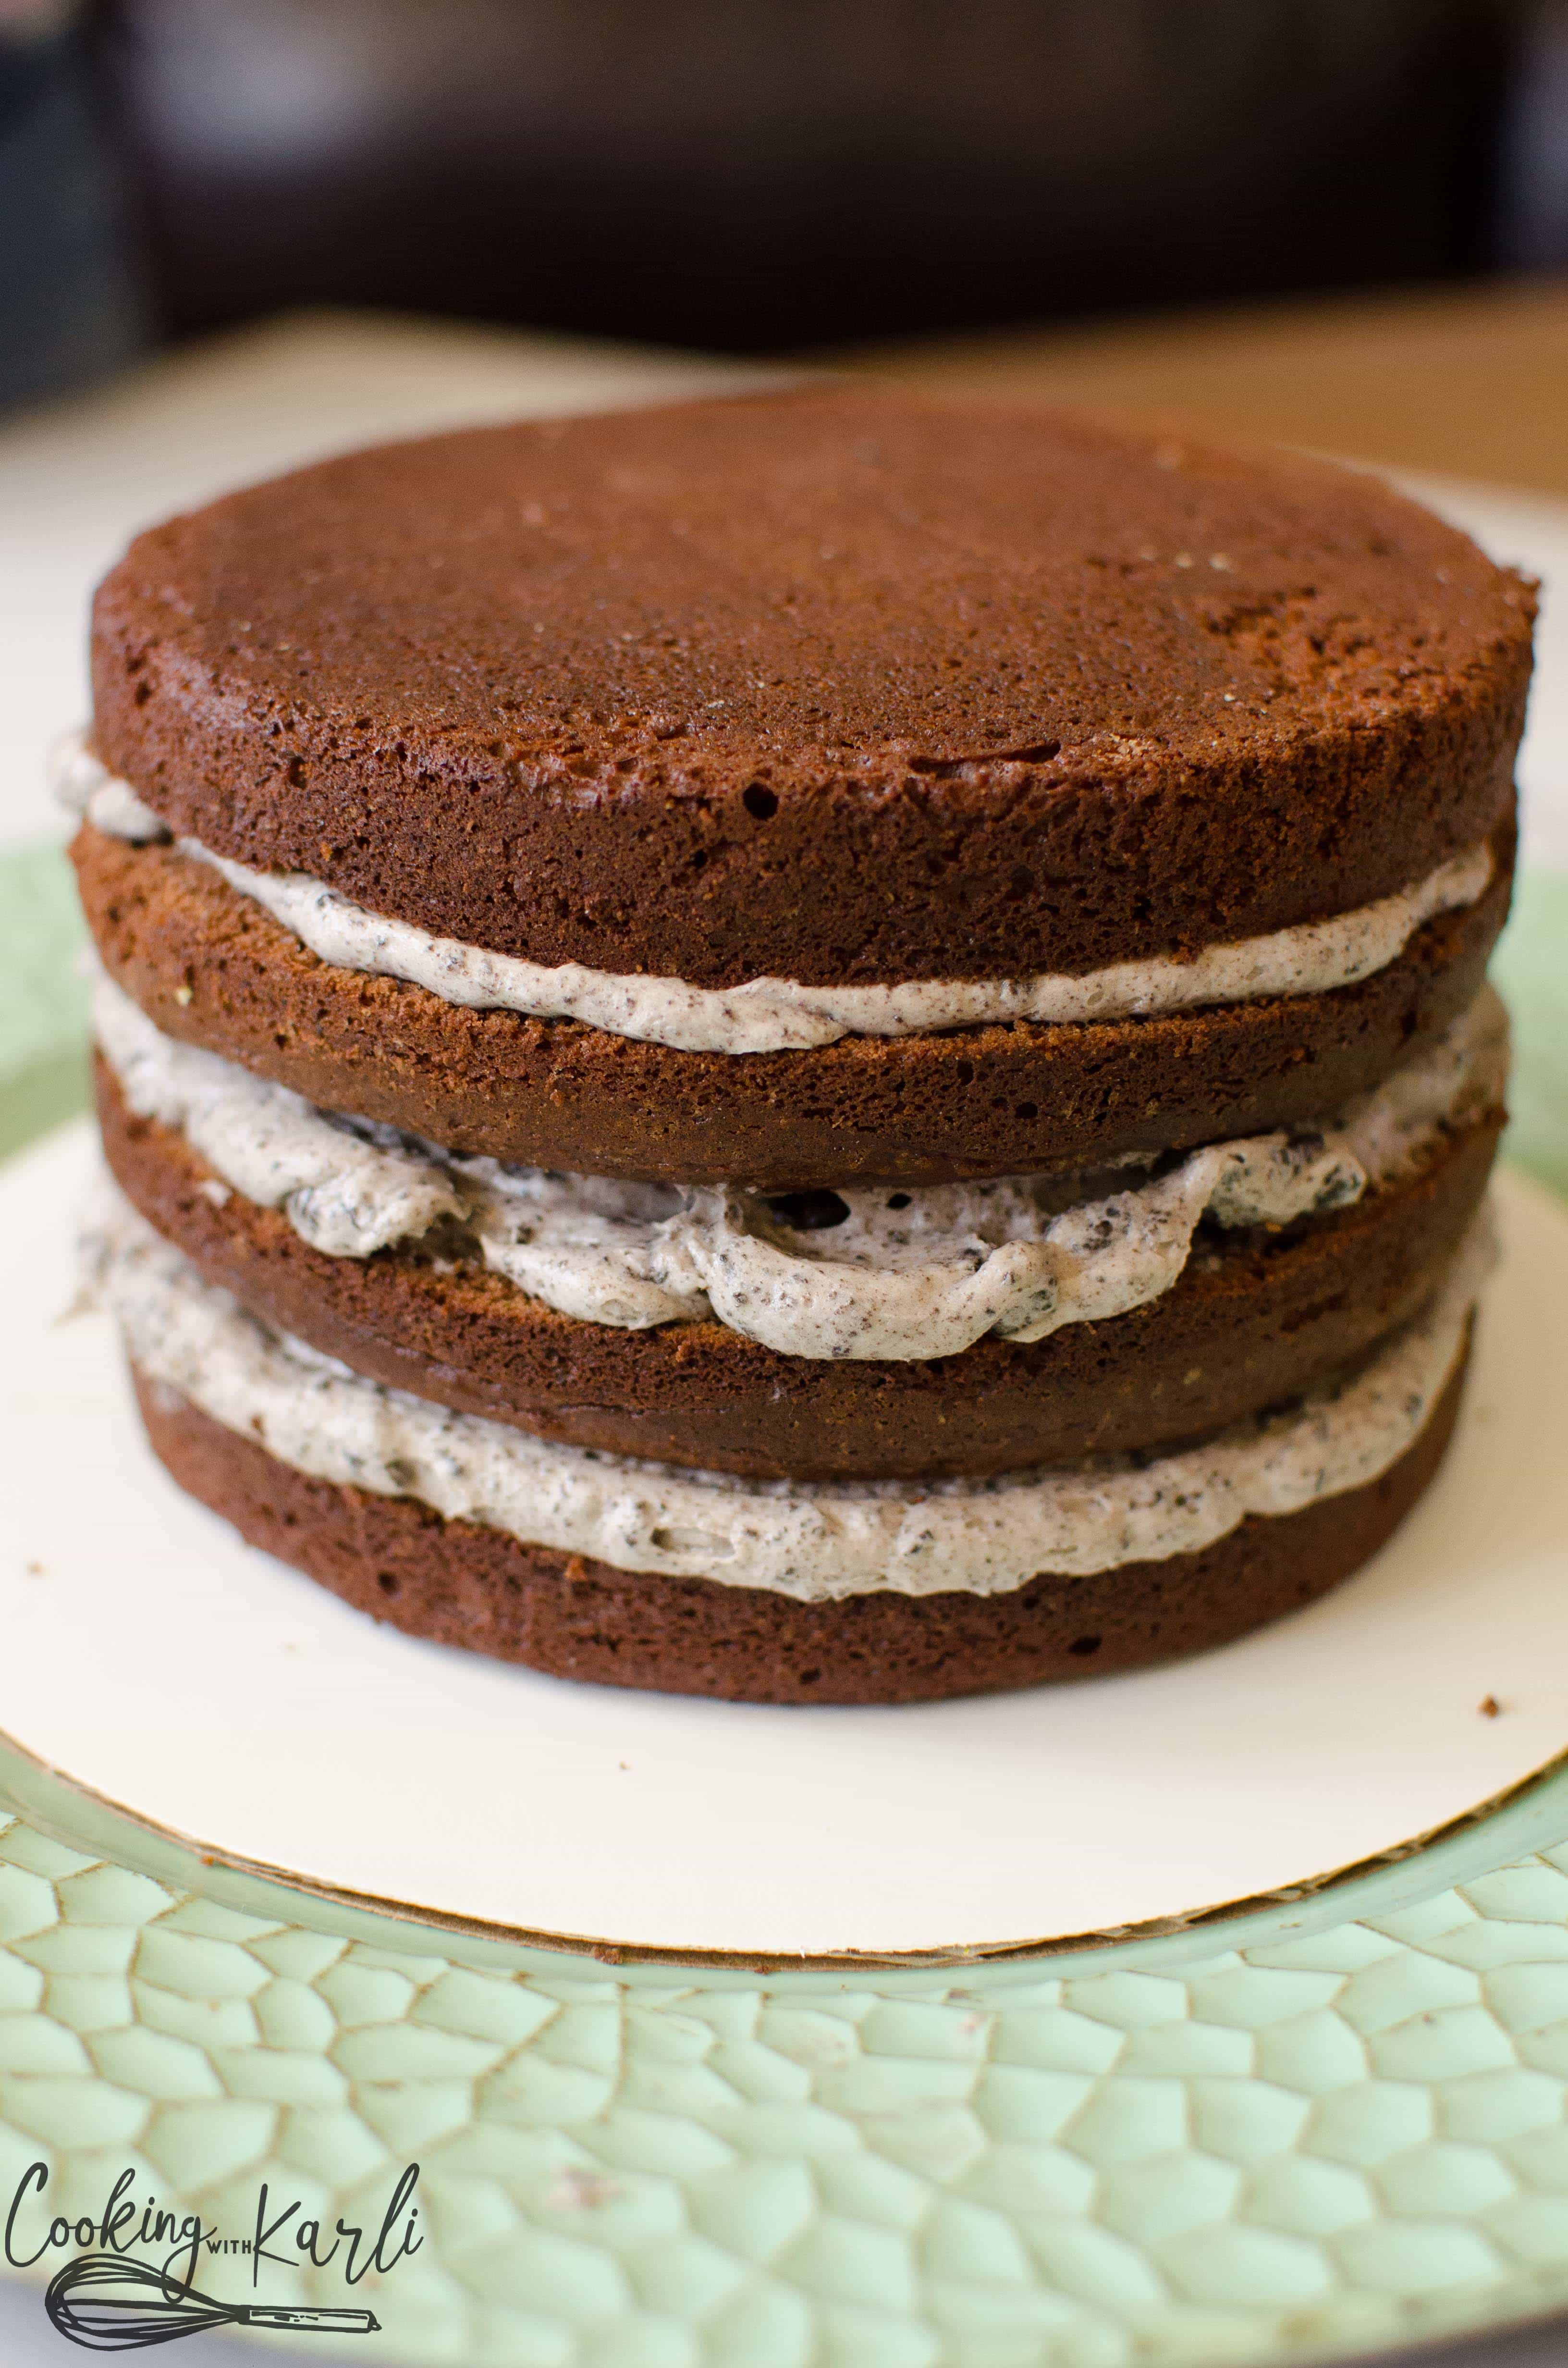 Crumb-less chocolate cake is perfect for layering and decorating.